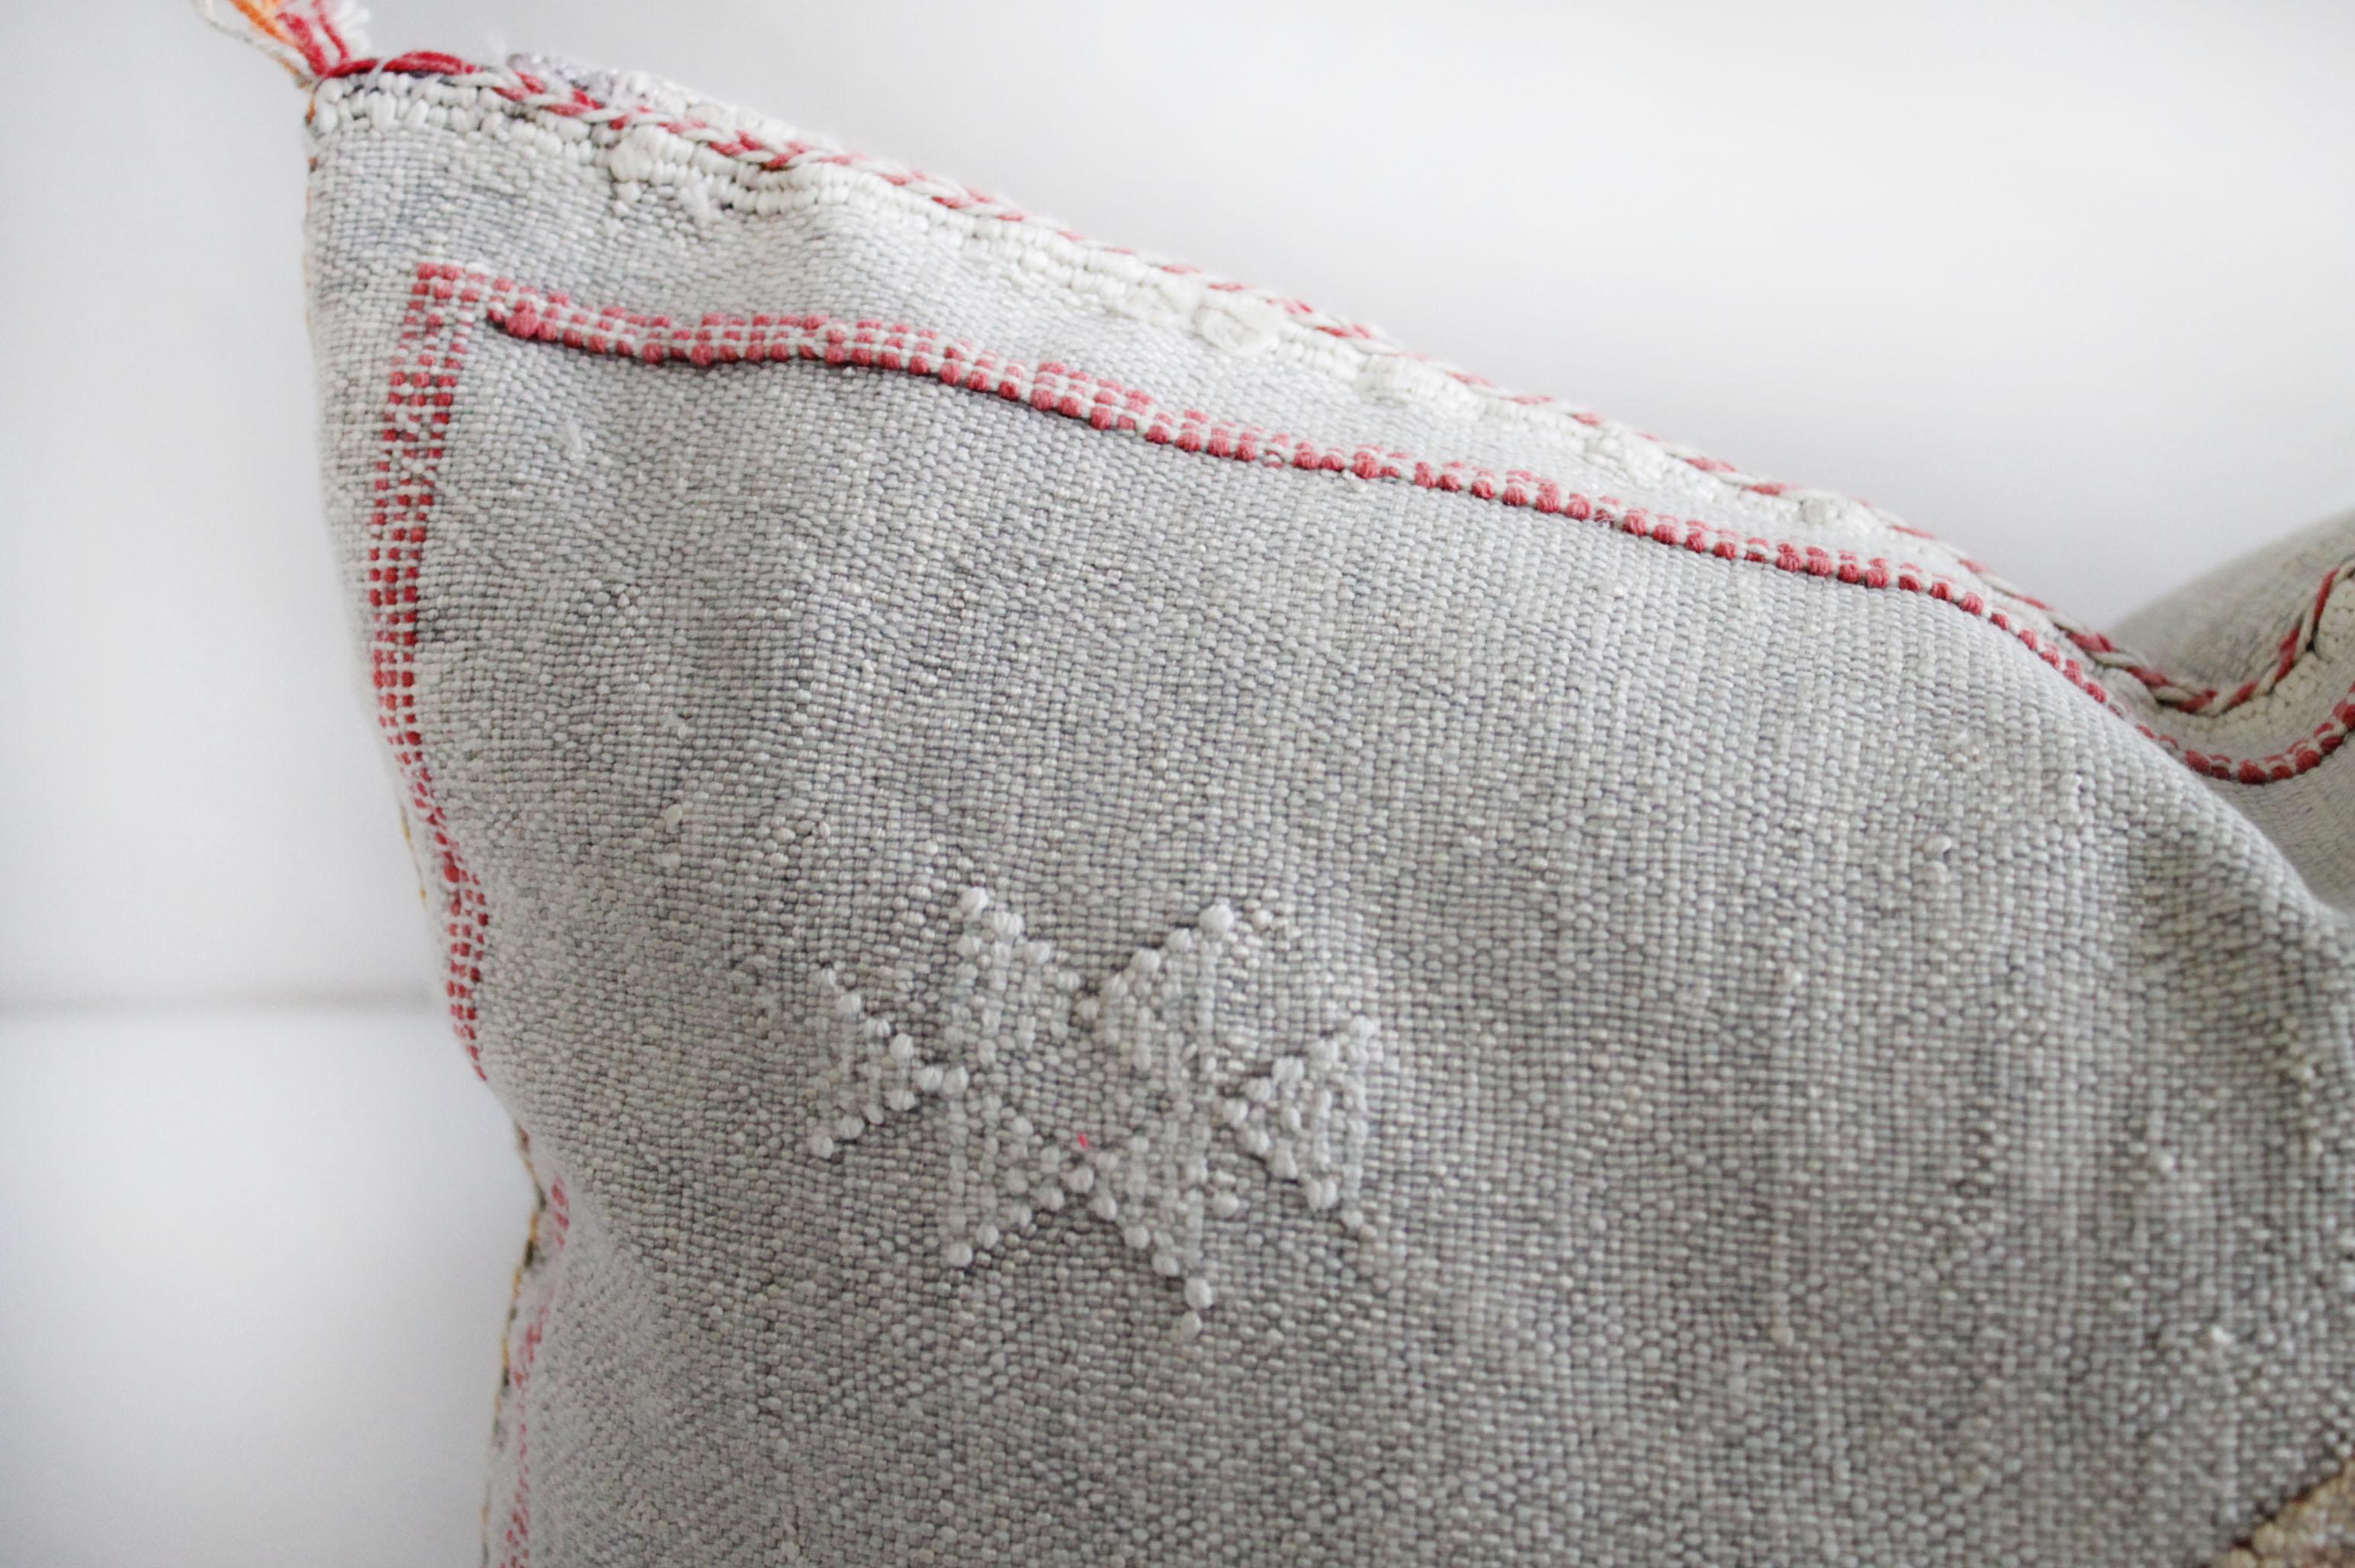 Moroccan handwoven cactus silk pillow
As shown with a beautiful light gray tone background, and white, with reddish pink and gold accents. Hidden zipper closure, backside is the same plain cactus silk with no embroidery.
Measures: 16? x 21?
WITH